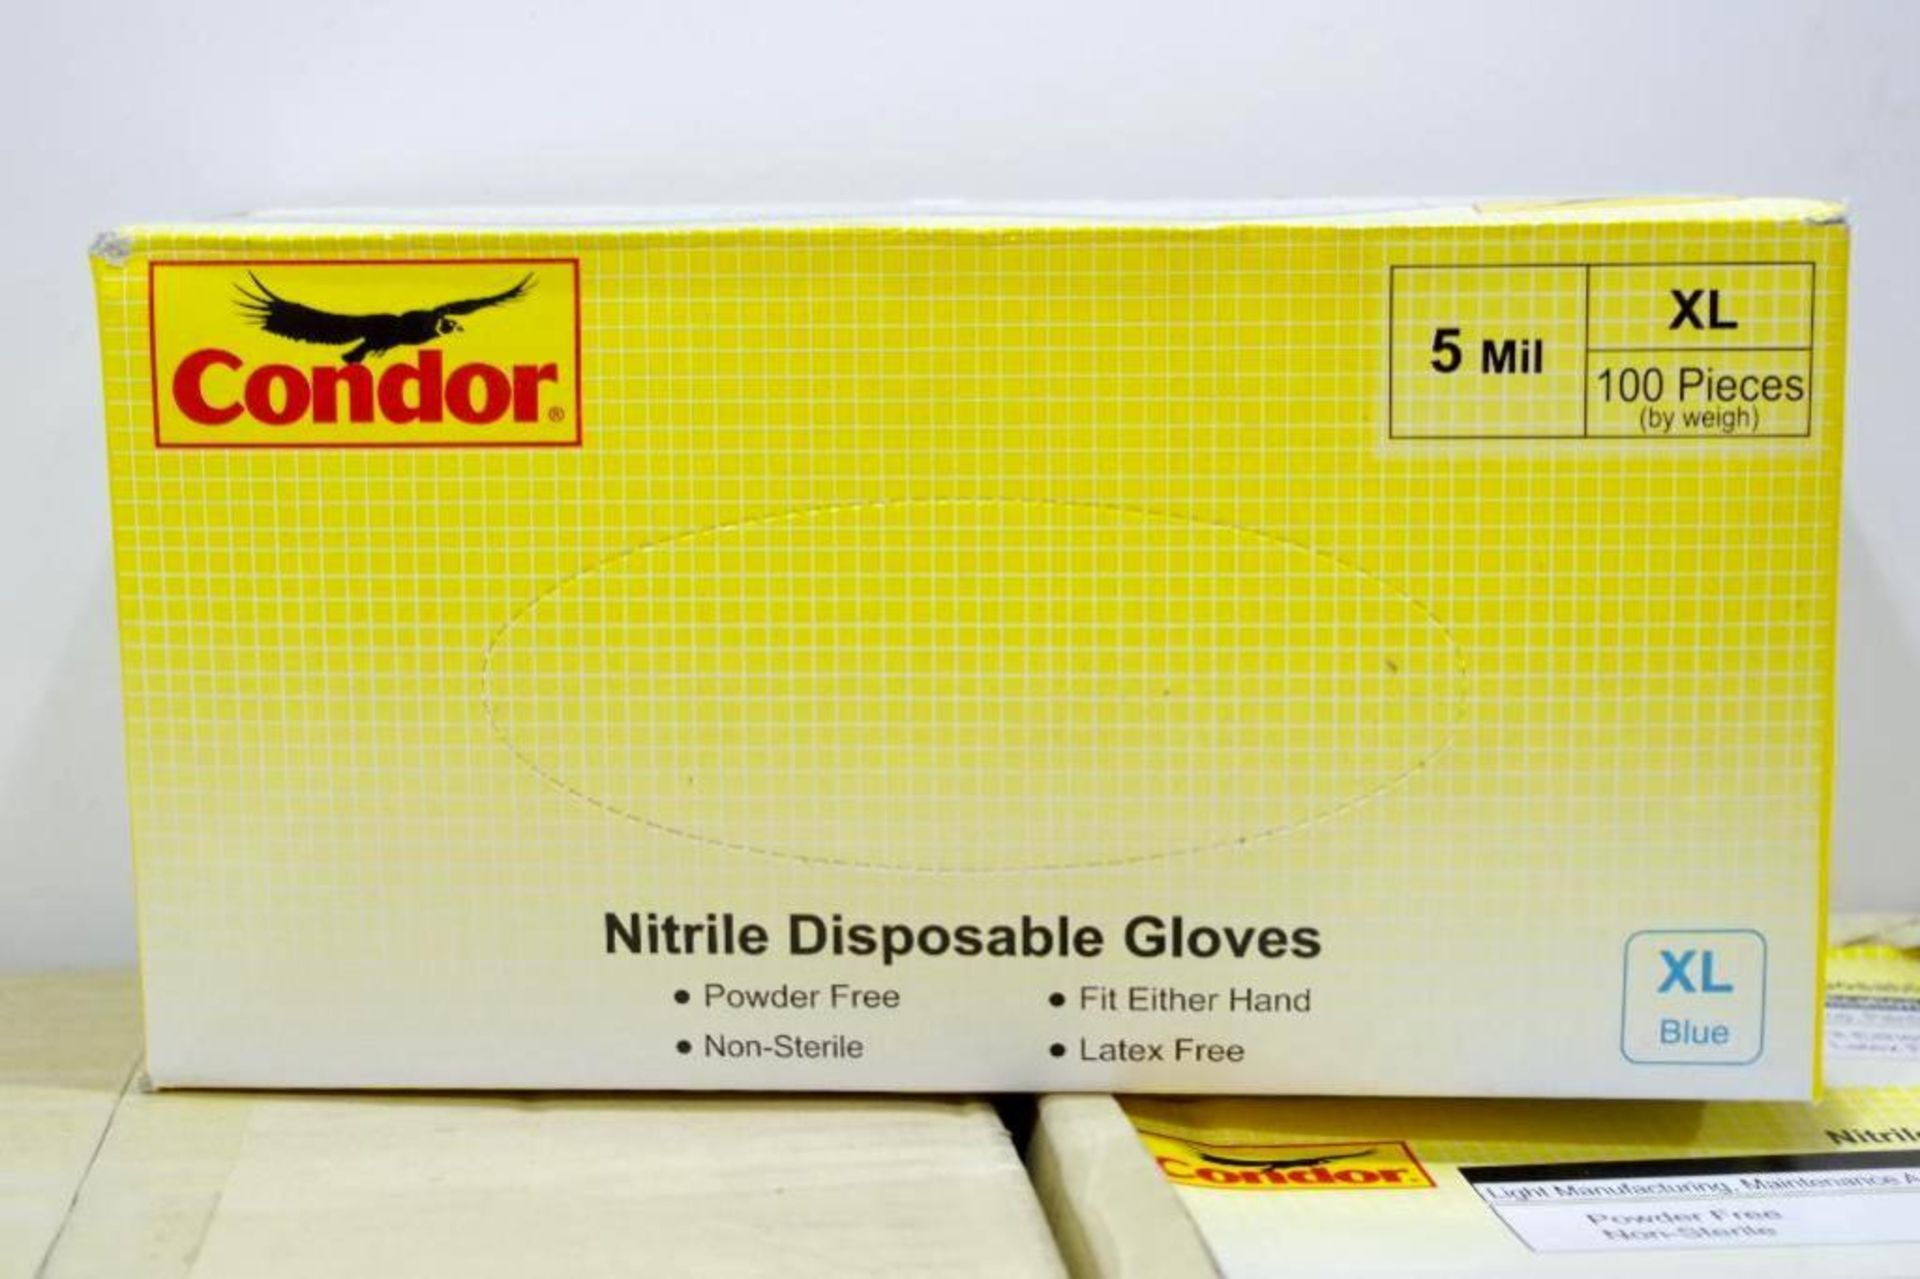 (2000) NEW CONDOR 9-1/2" Powder Free Unlined Nitrile Disposable Gloves, Blue, Size XL - Image 2 of 4